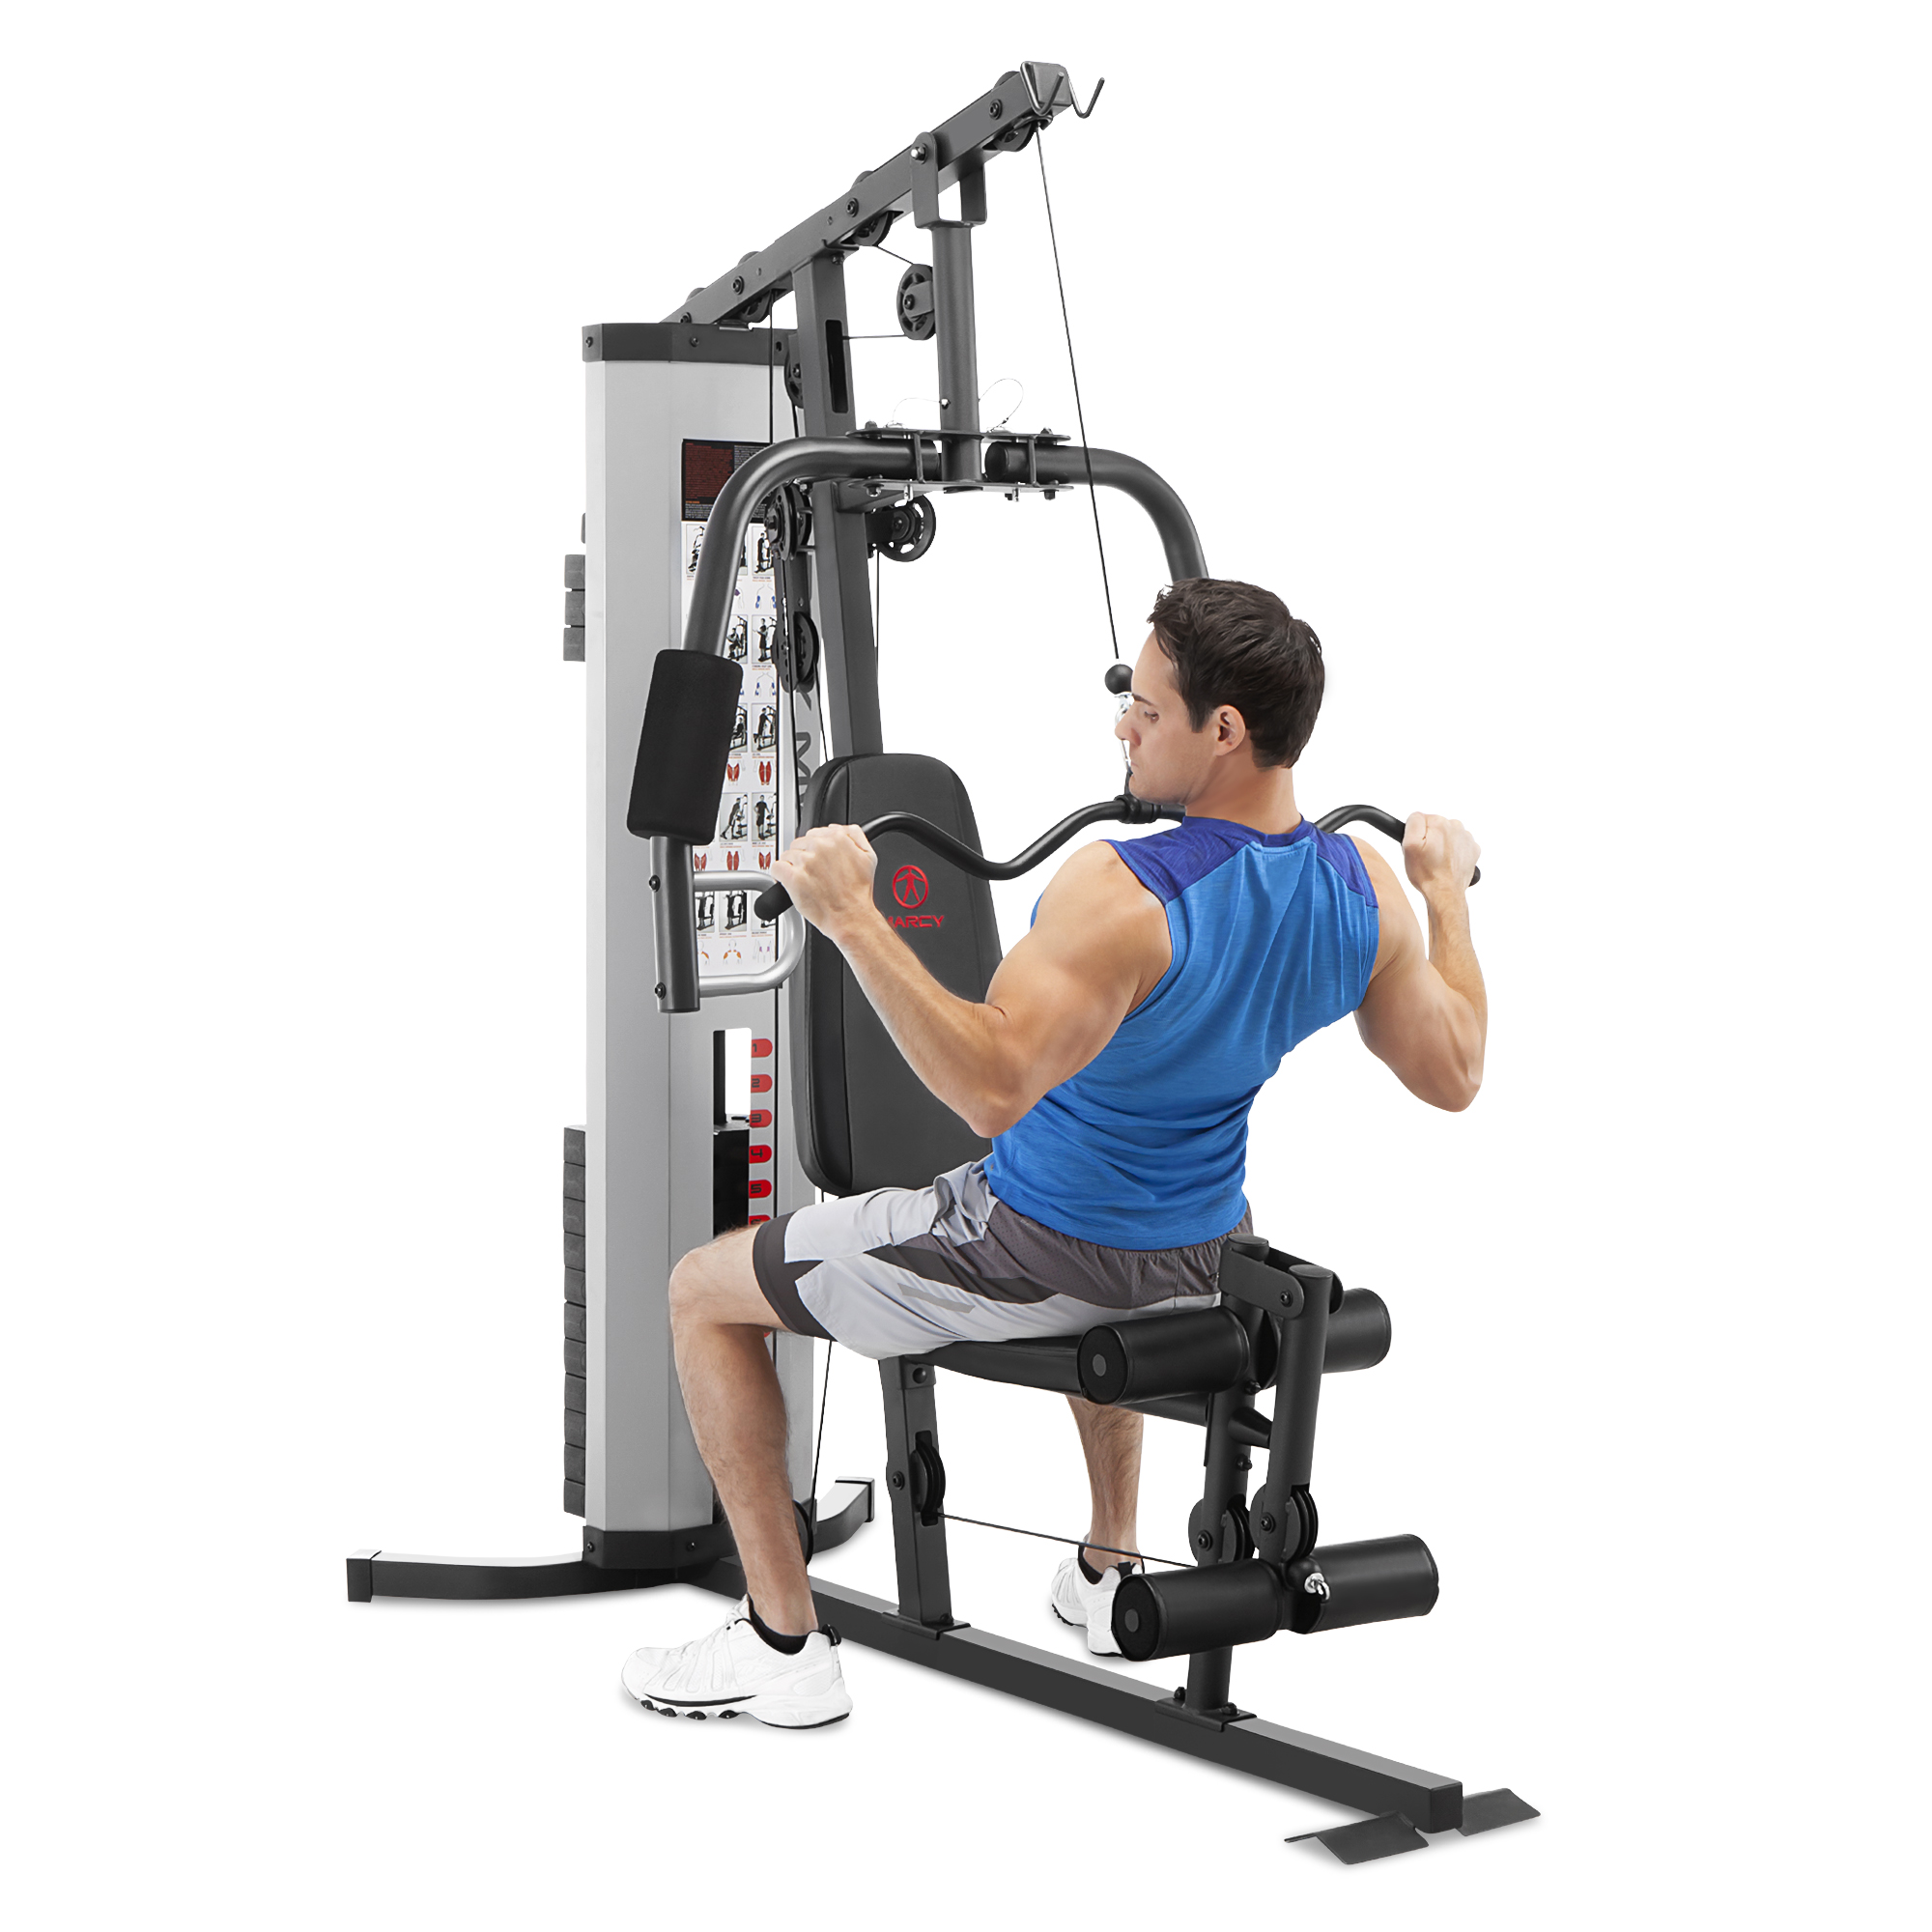 https://cdn11.bigcommerce.com/s-r2fl439k1s/images/stencil/original/products/138/2149/Marcy_Home_Gym_System_150lb_Weight_Stack_Machine_MWM-988_-_Lat_Pull_Down__96266.1677714781.jpg